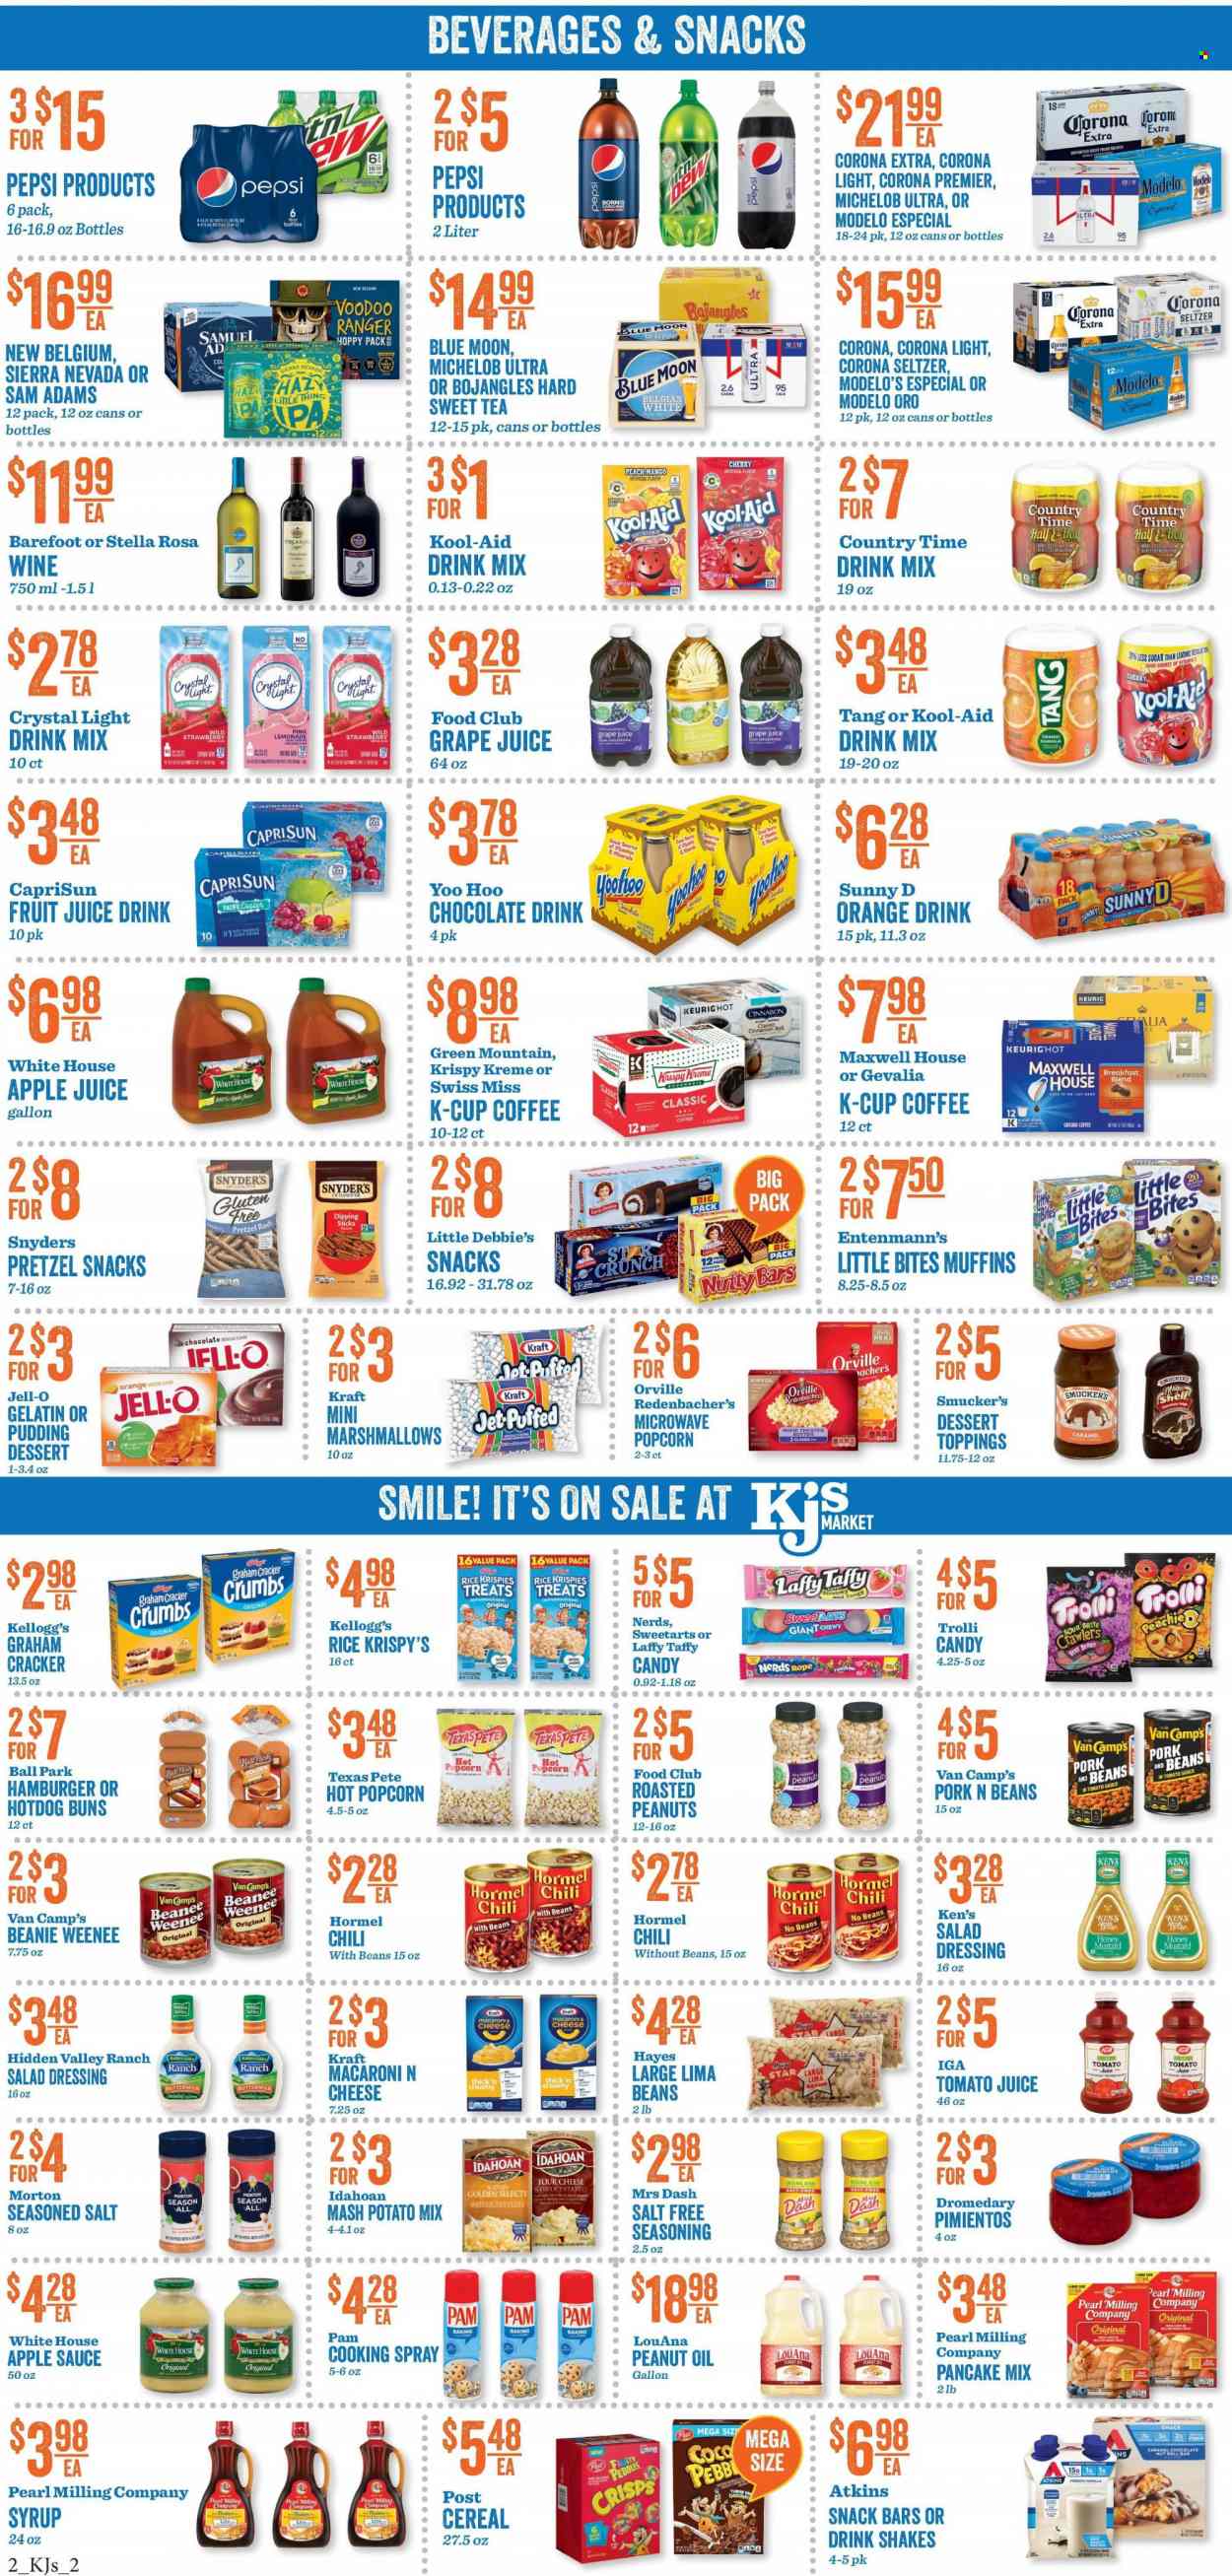 thumbnail - KJ´s Market Flyer - 05/24/2023 - 05/30/2023 - Sales products - hot dog rolls, pretzels, buns, cinnamon roll, muffin, Entenmann's, dessert, pancake mix, cherries, oranges, macaroni & cheese, mashed potatoes, hamburger, Kraft®, Hormel, ready meal, snack, pudding, Swiss Miss, buttermilk, shake, lima beans, marshmallows, Trolli, crackers, Kellogg's, snack bar, Little Bites, Candy, popcorn, Jell-O, cereals, Rice Krispies, spice, caramel, mustard, salad dressing, honey mustard, dressing, cooking spray, peanut oil, oil, apple sauce, syrup, roasted peanuts, peanuts, apple juice, lemonade, tomato juice, Pepsi, juice, fruit juice, soft drink, Country Time, chocolate drink, powder drink, Maxwell House, tea, coffee, ground coffee, coffee capsules, K-Cups, Gevalia, Green Mountain, wine, alcohol, beer, Corona Extra, Modelo, Jet, Brite, Shell, vitamin c, Half and half, Blue Moon, Michelob. Page 2.